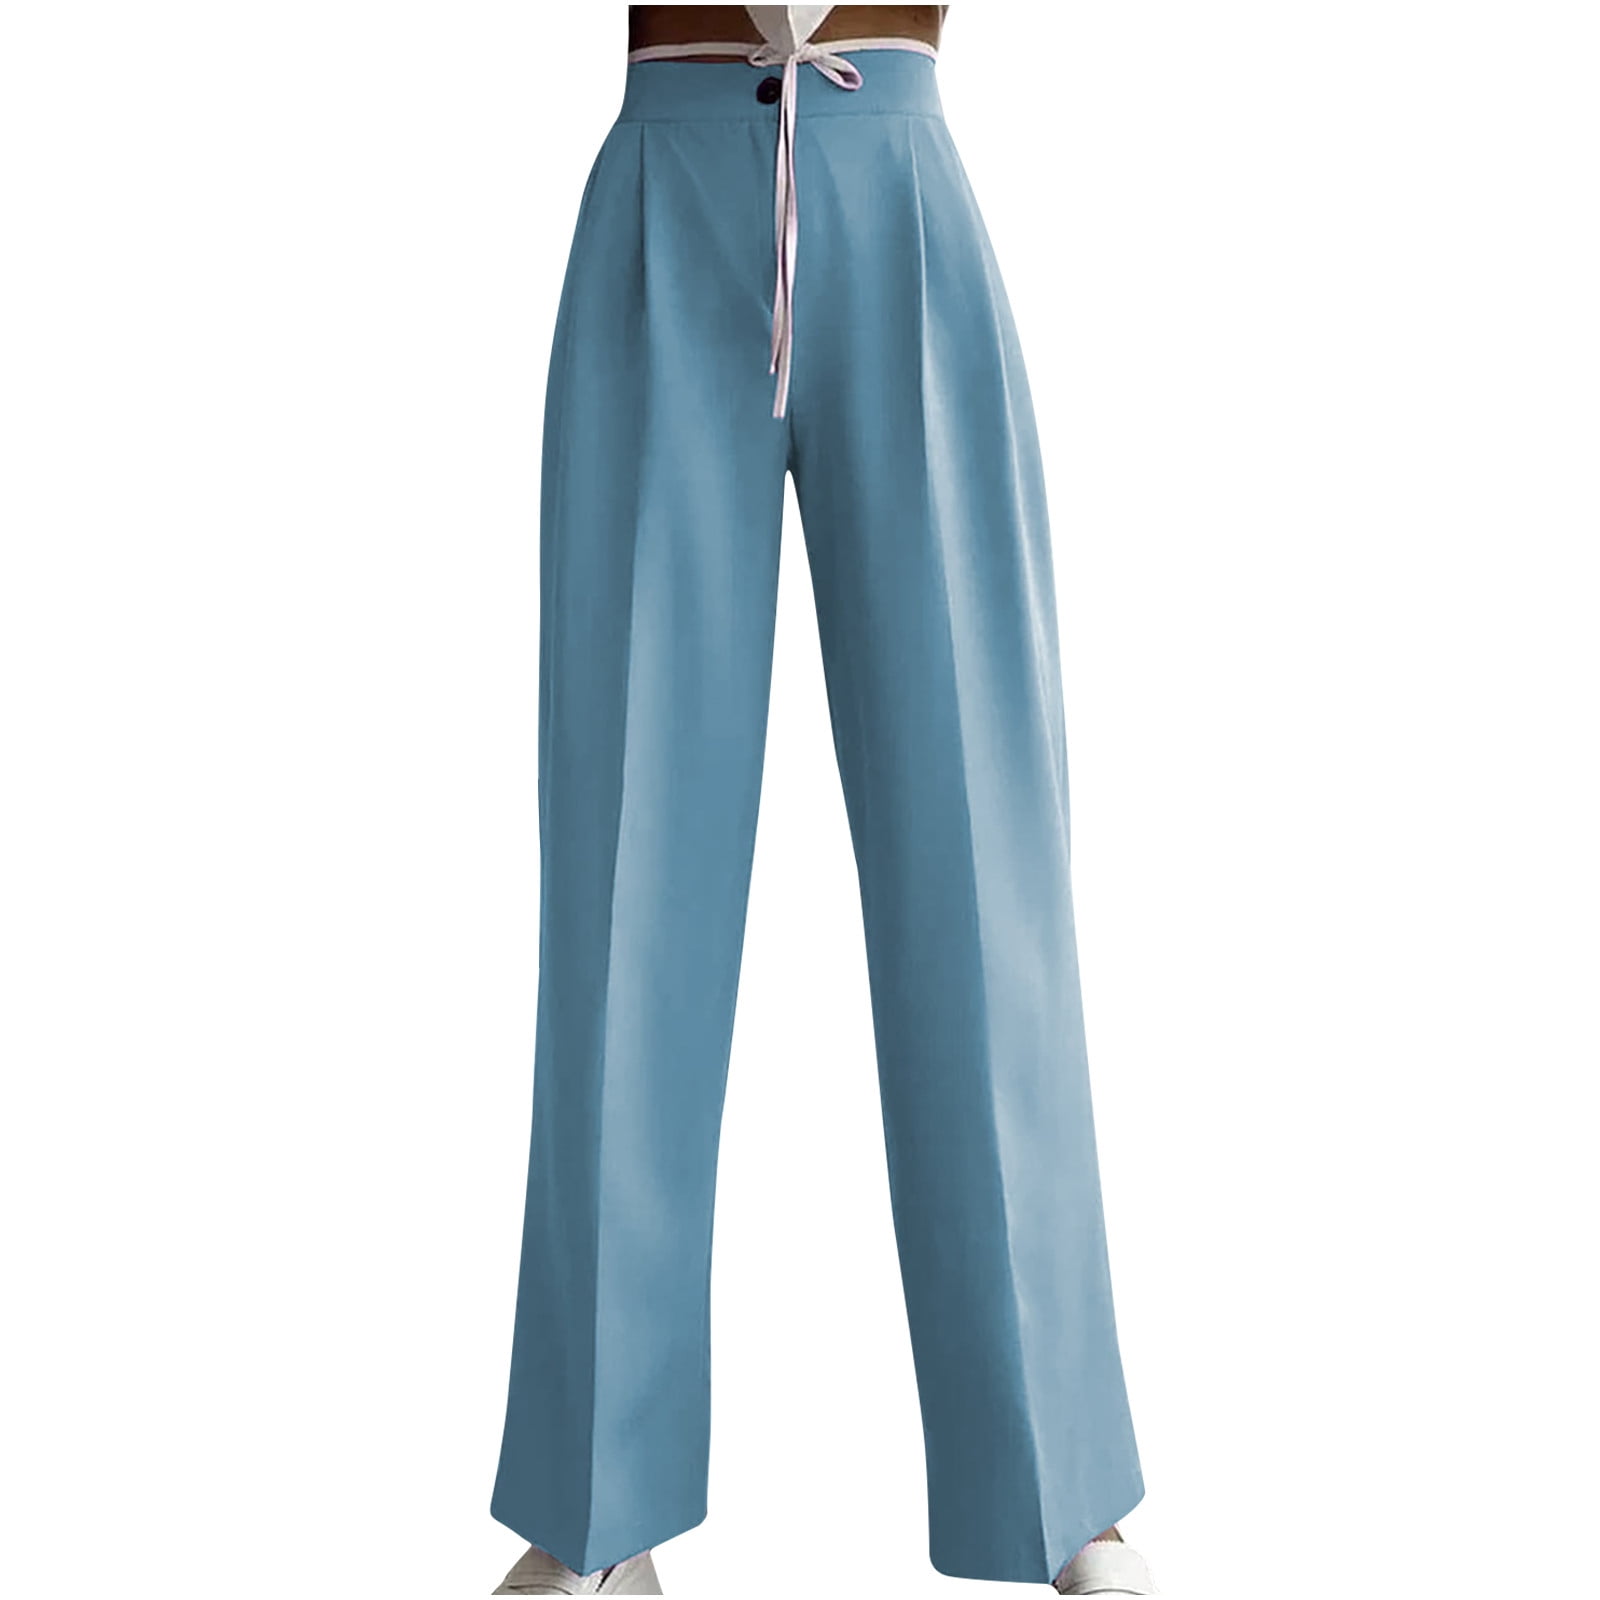 Winter Savings Clearance! Suokom Women Pants Trousers Full Pants Casual  Straight Solid Color Suit Pants 